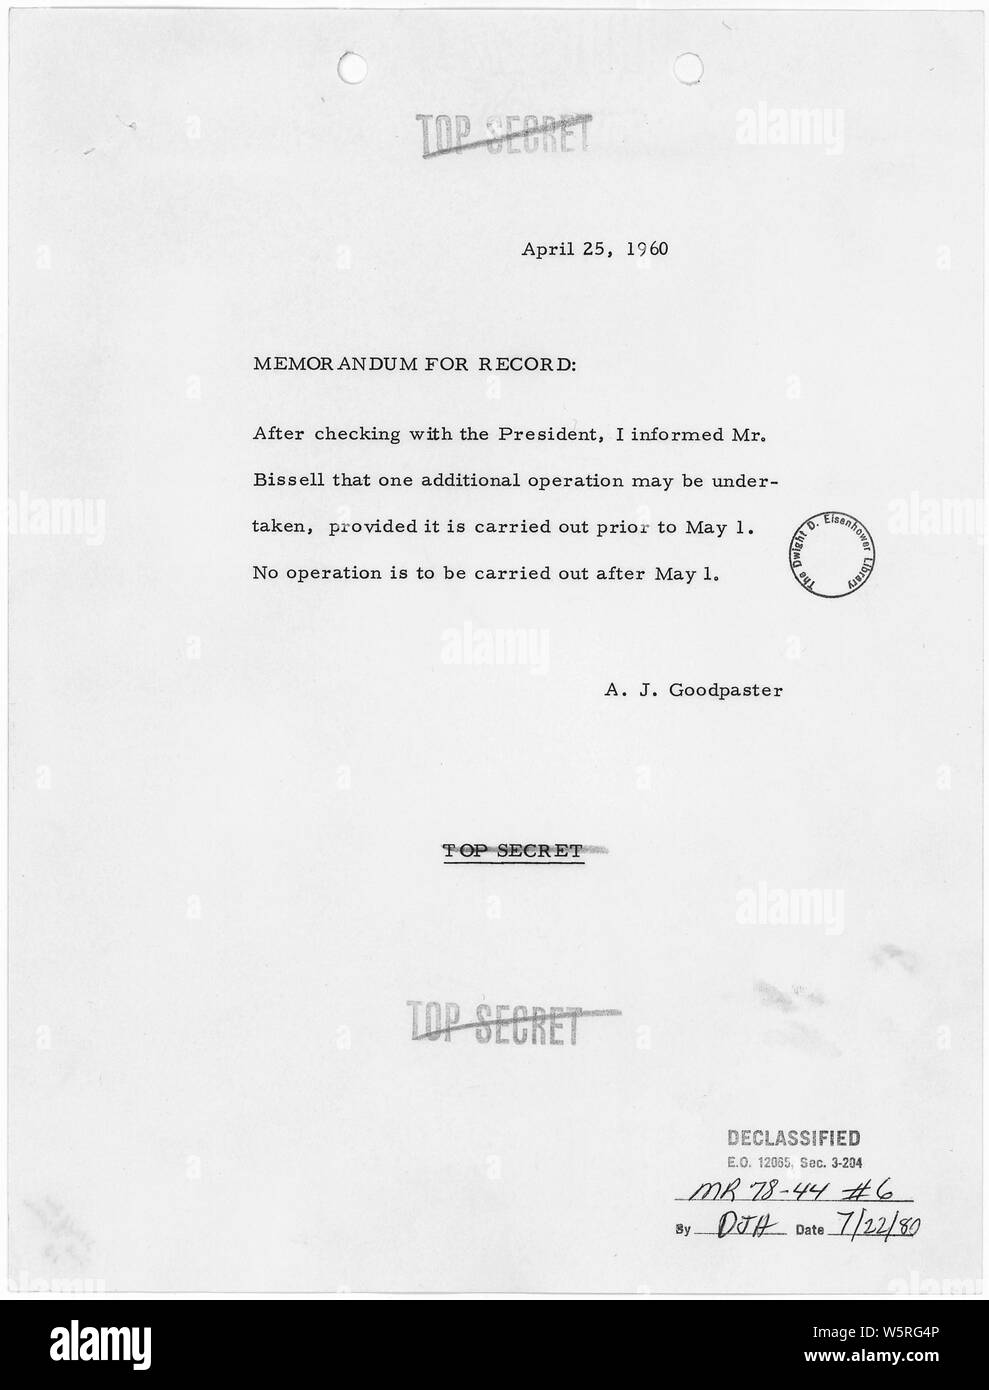 Memorandum for Record by A. J. Goodpaster (Andrew Jackson Goodpaster); Scope and content:  Authorization for one additional U-2 operation prior to May 1, 1960. Stock Photo